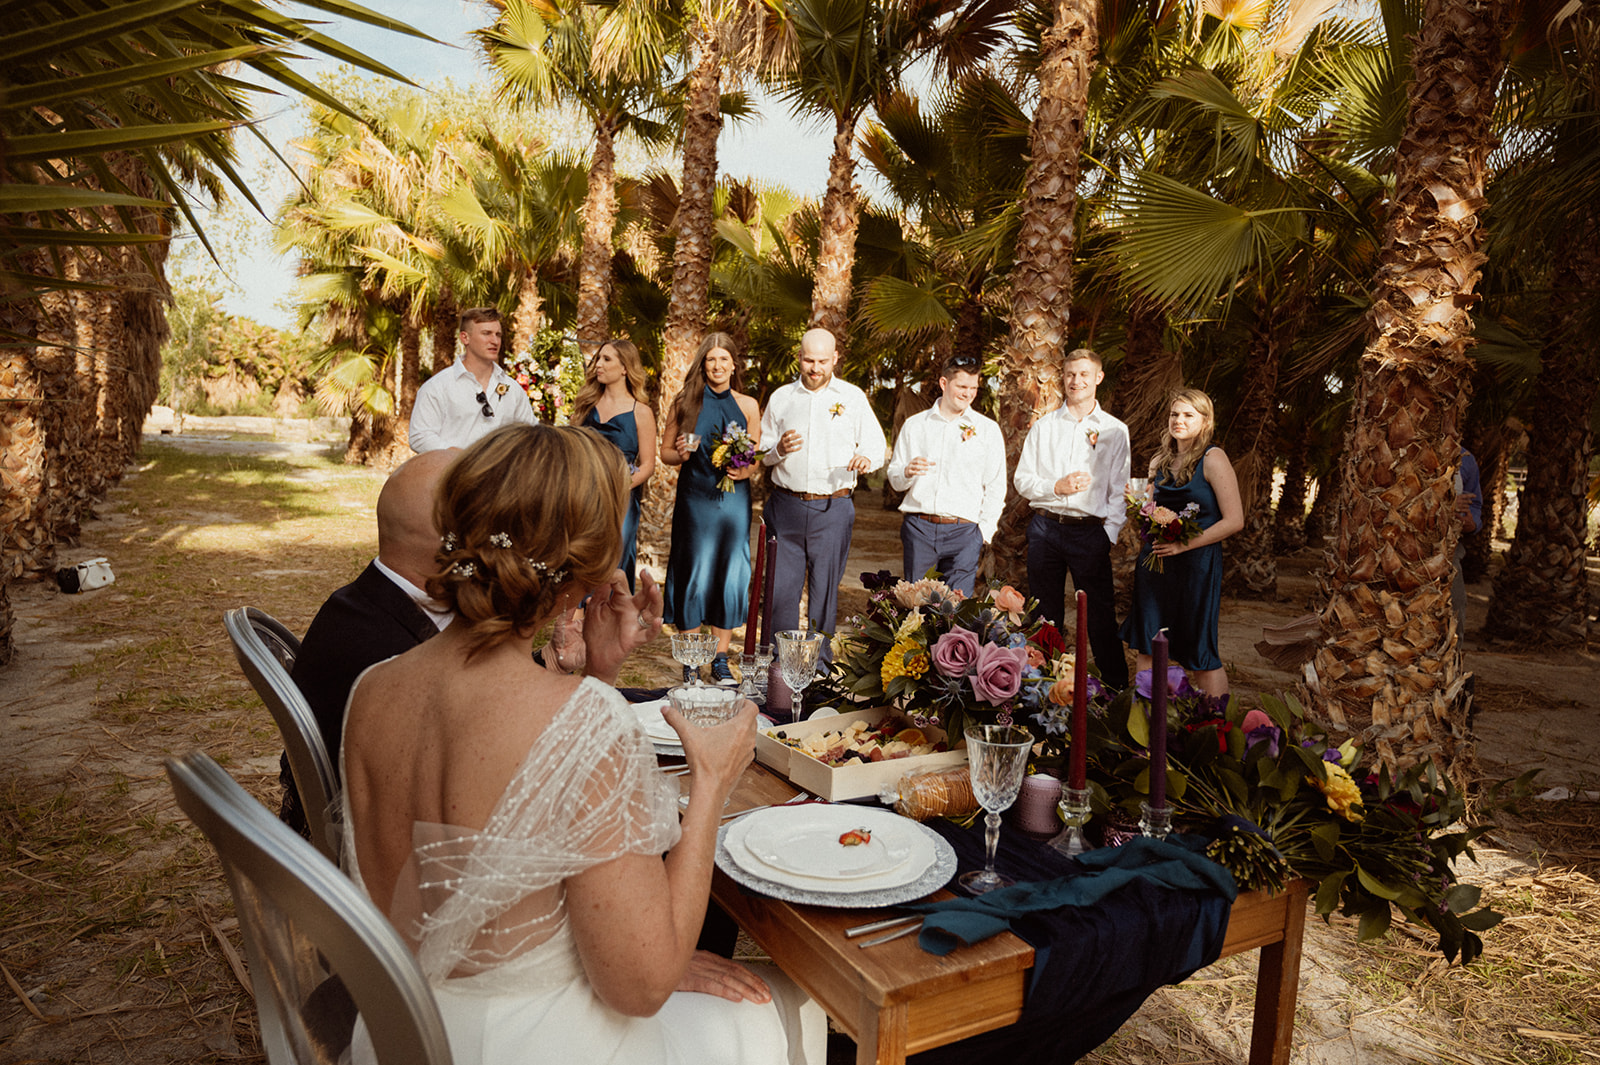 Wedding party doing a cheers with Newlyweds at sweetheart table in palm tree garden 